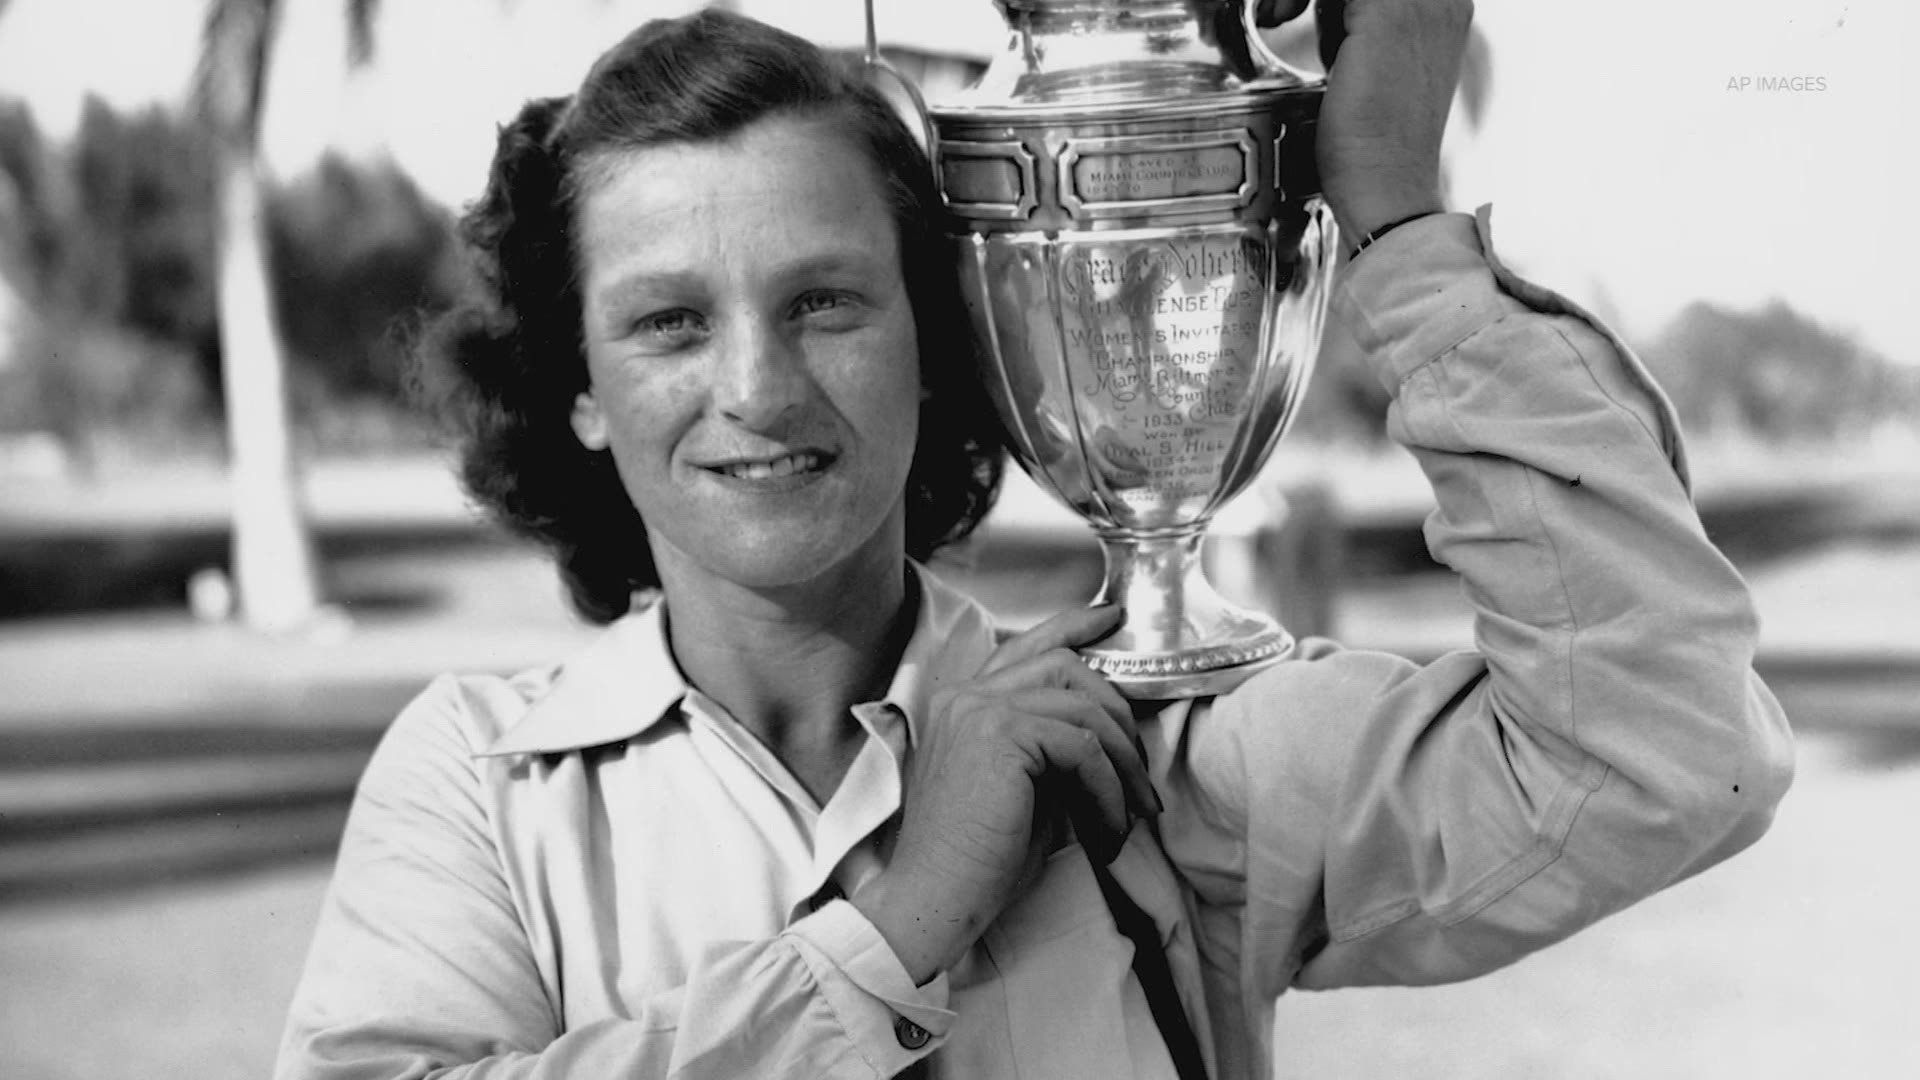 Babe Zaharias, the athlete who forever transformed women's sports